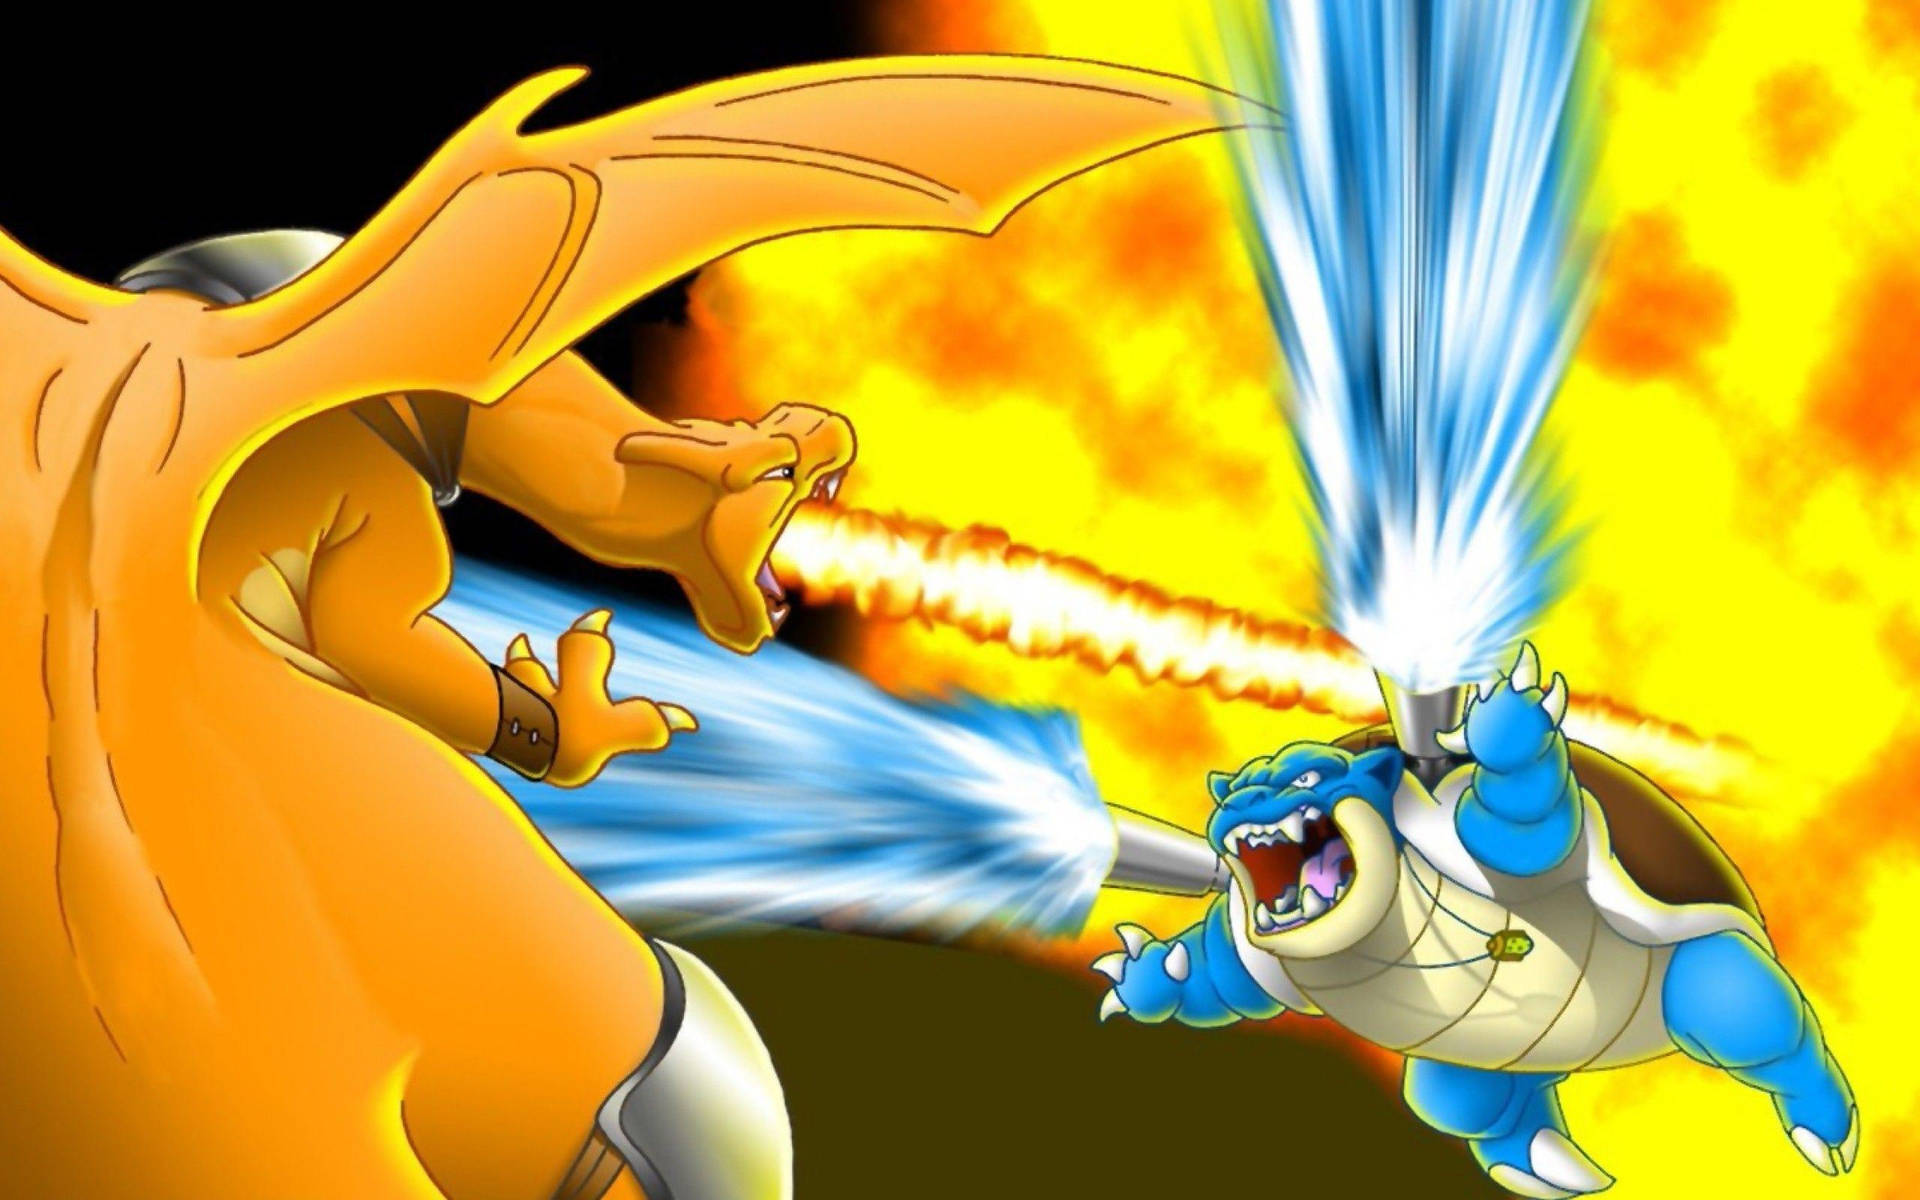 Two Generations Of Fire And Water – Blastoise And Charizard Background